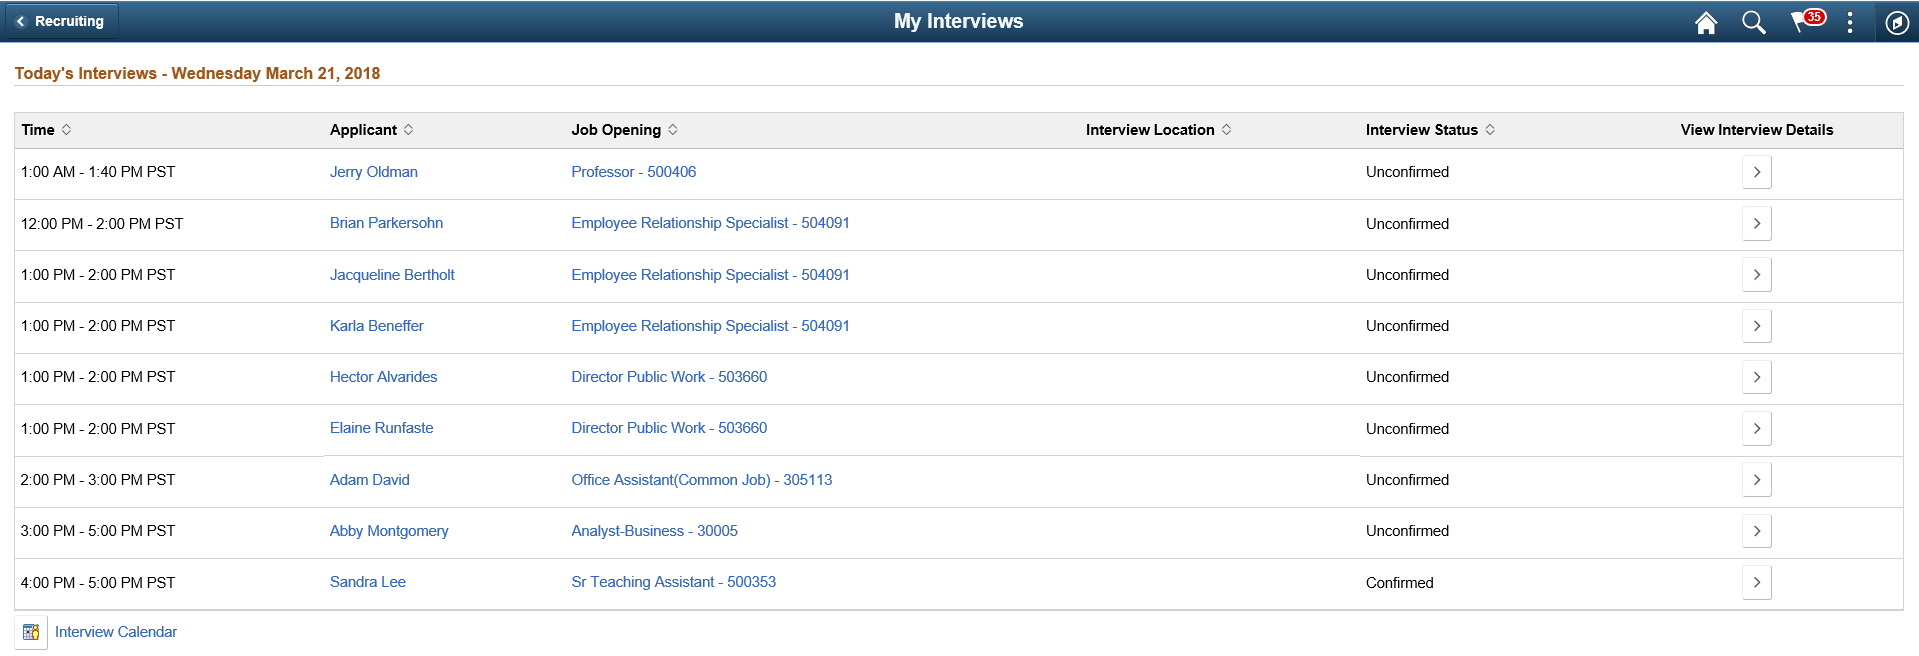 My Interviews Page